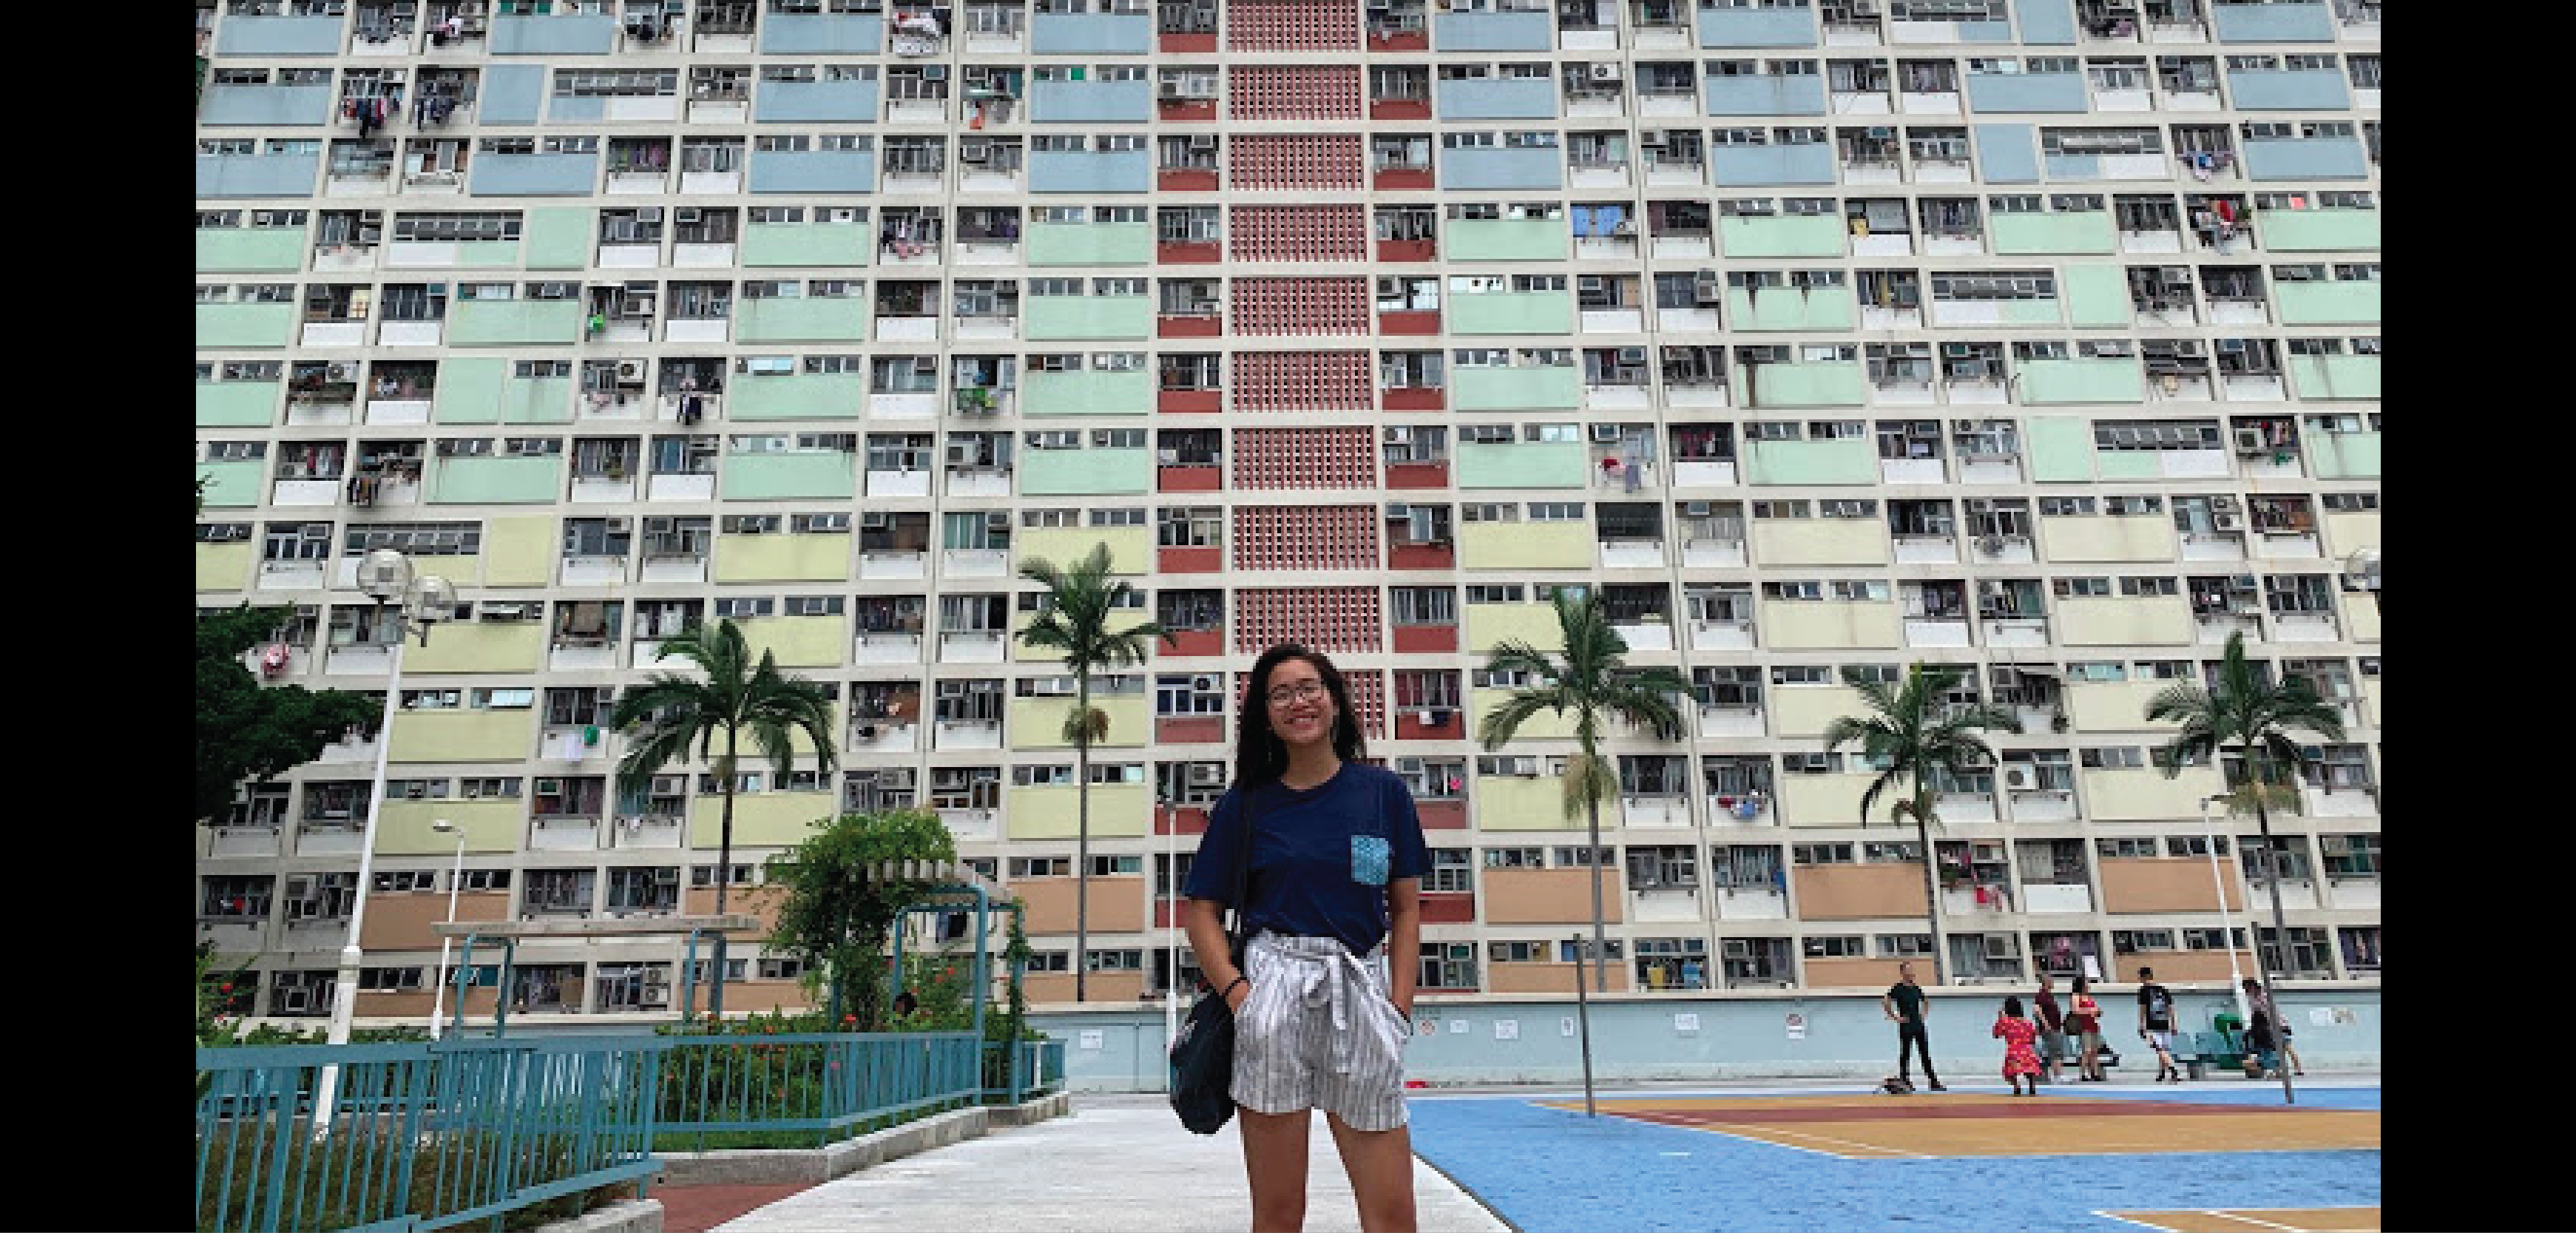 Chloe Wong at Choi Hung Estate (The Rainbow Estate), one of Hong Kong's first low-income housing estates